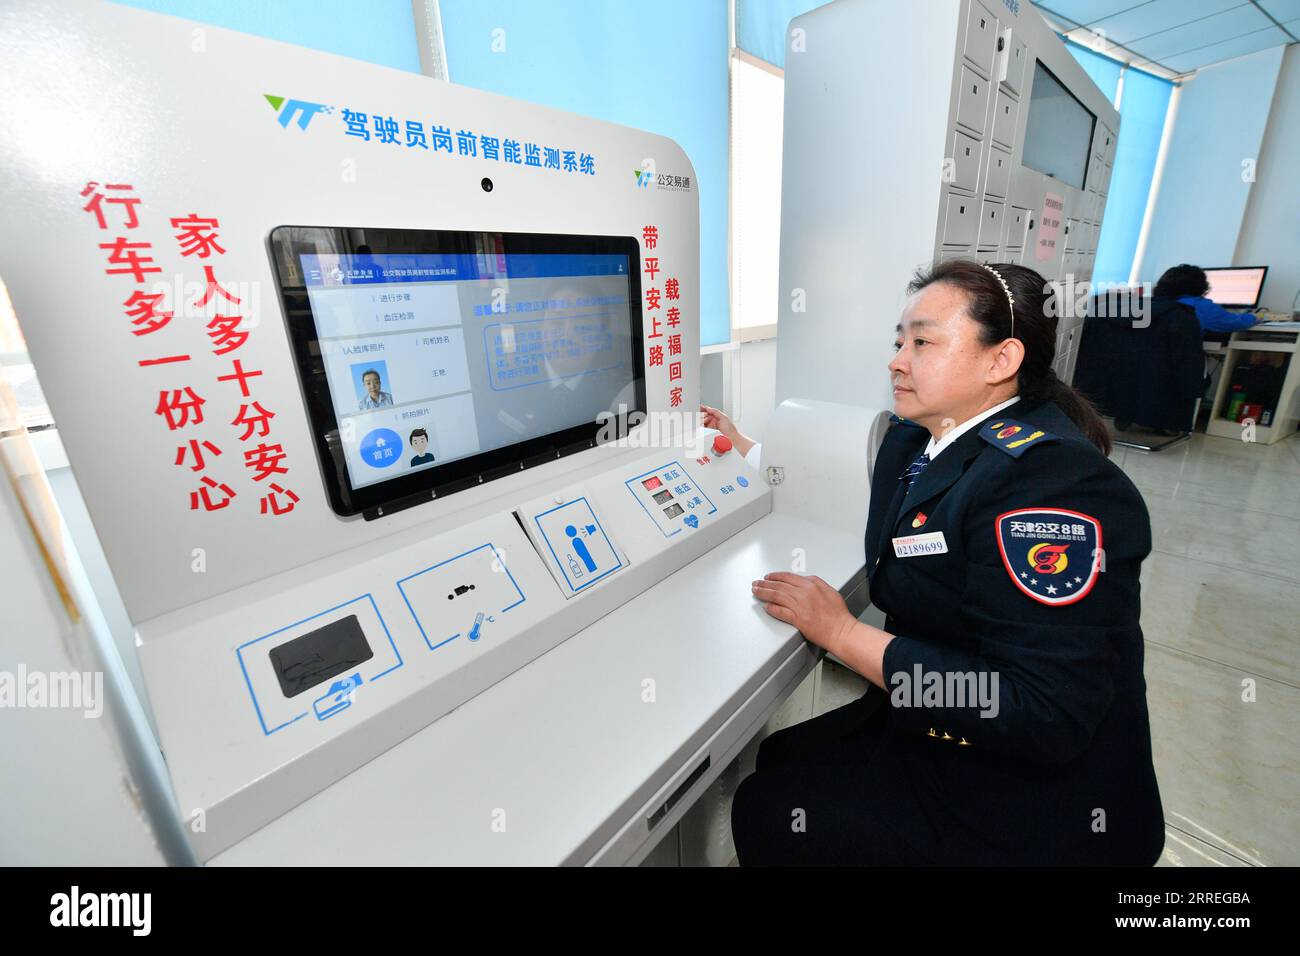 220228 -- TIANJIN, Feb. 28, 2022 -- Wang Yan checks her blood pressure before starting her shift at a bus service office in north China s Tianjin, Feb. 24, 2022. Tianjin bus driver Wang Yan is a National People s Congress NPC deputy. Since taking on her duties in 2018, Wang has continued to submit suggestions to the NPC, covering a variety of areas, such as transportation and health care. As a bus driver, she makes the most of her job, listening to her passengers opinions, while formulating suggestions that can have an influence on government policies. This year is the last year of her term of Stock Photo